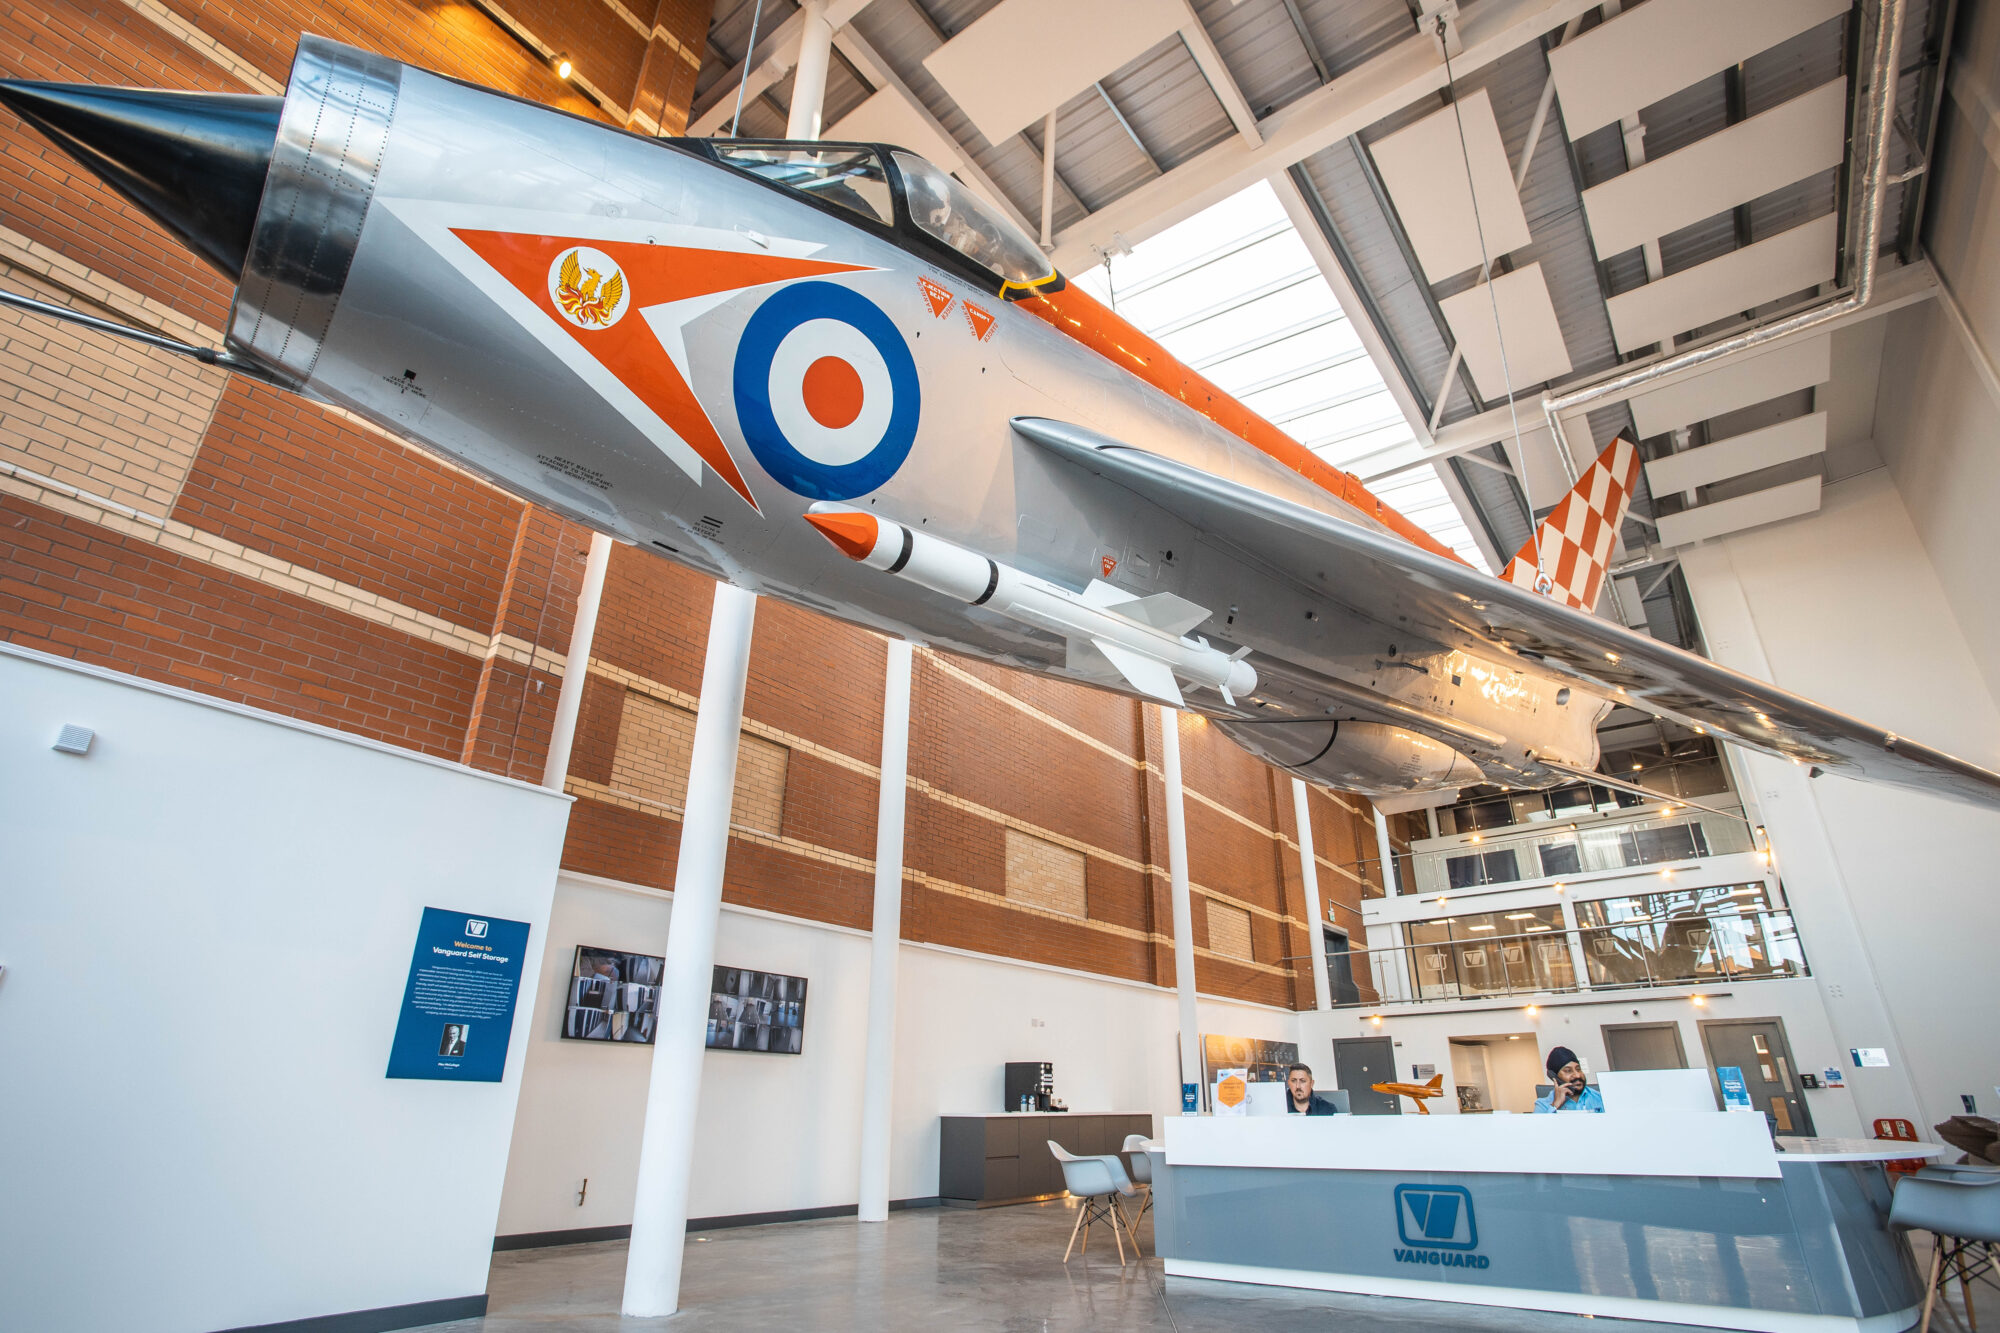 An interior shot of Vanguard's Bristol branch showcasing the fully restored English Electric Lightning fighter jet plane hanging in the reception.